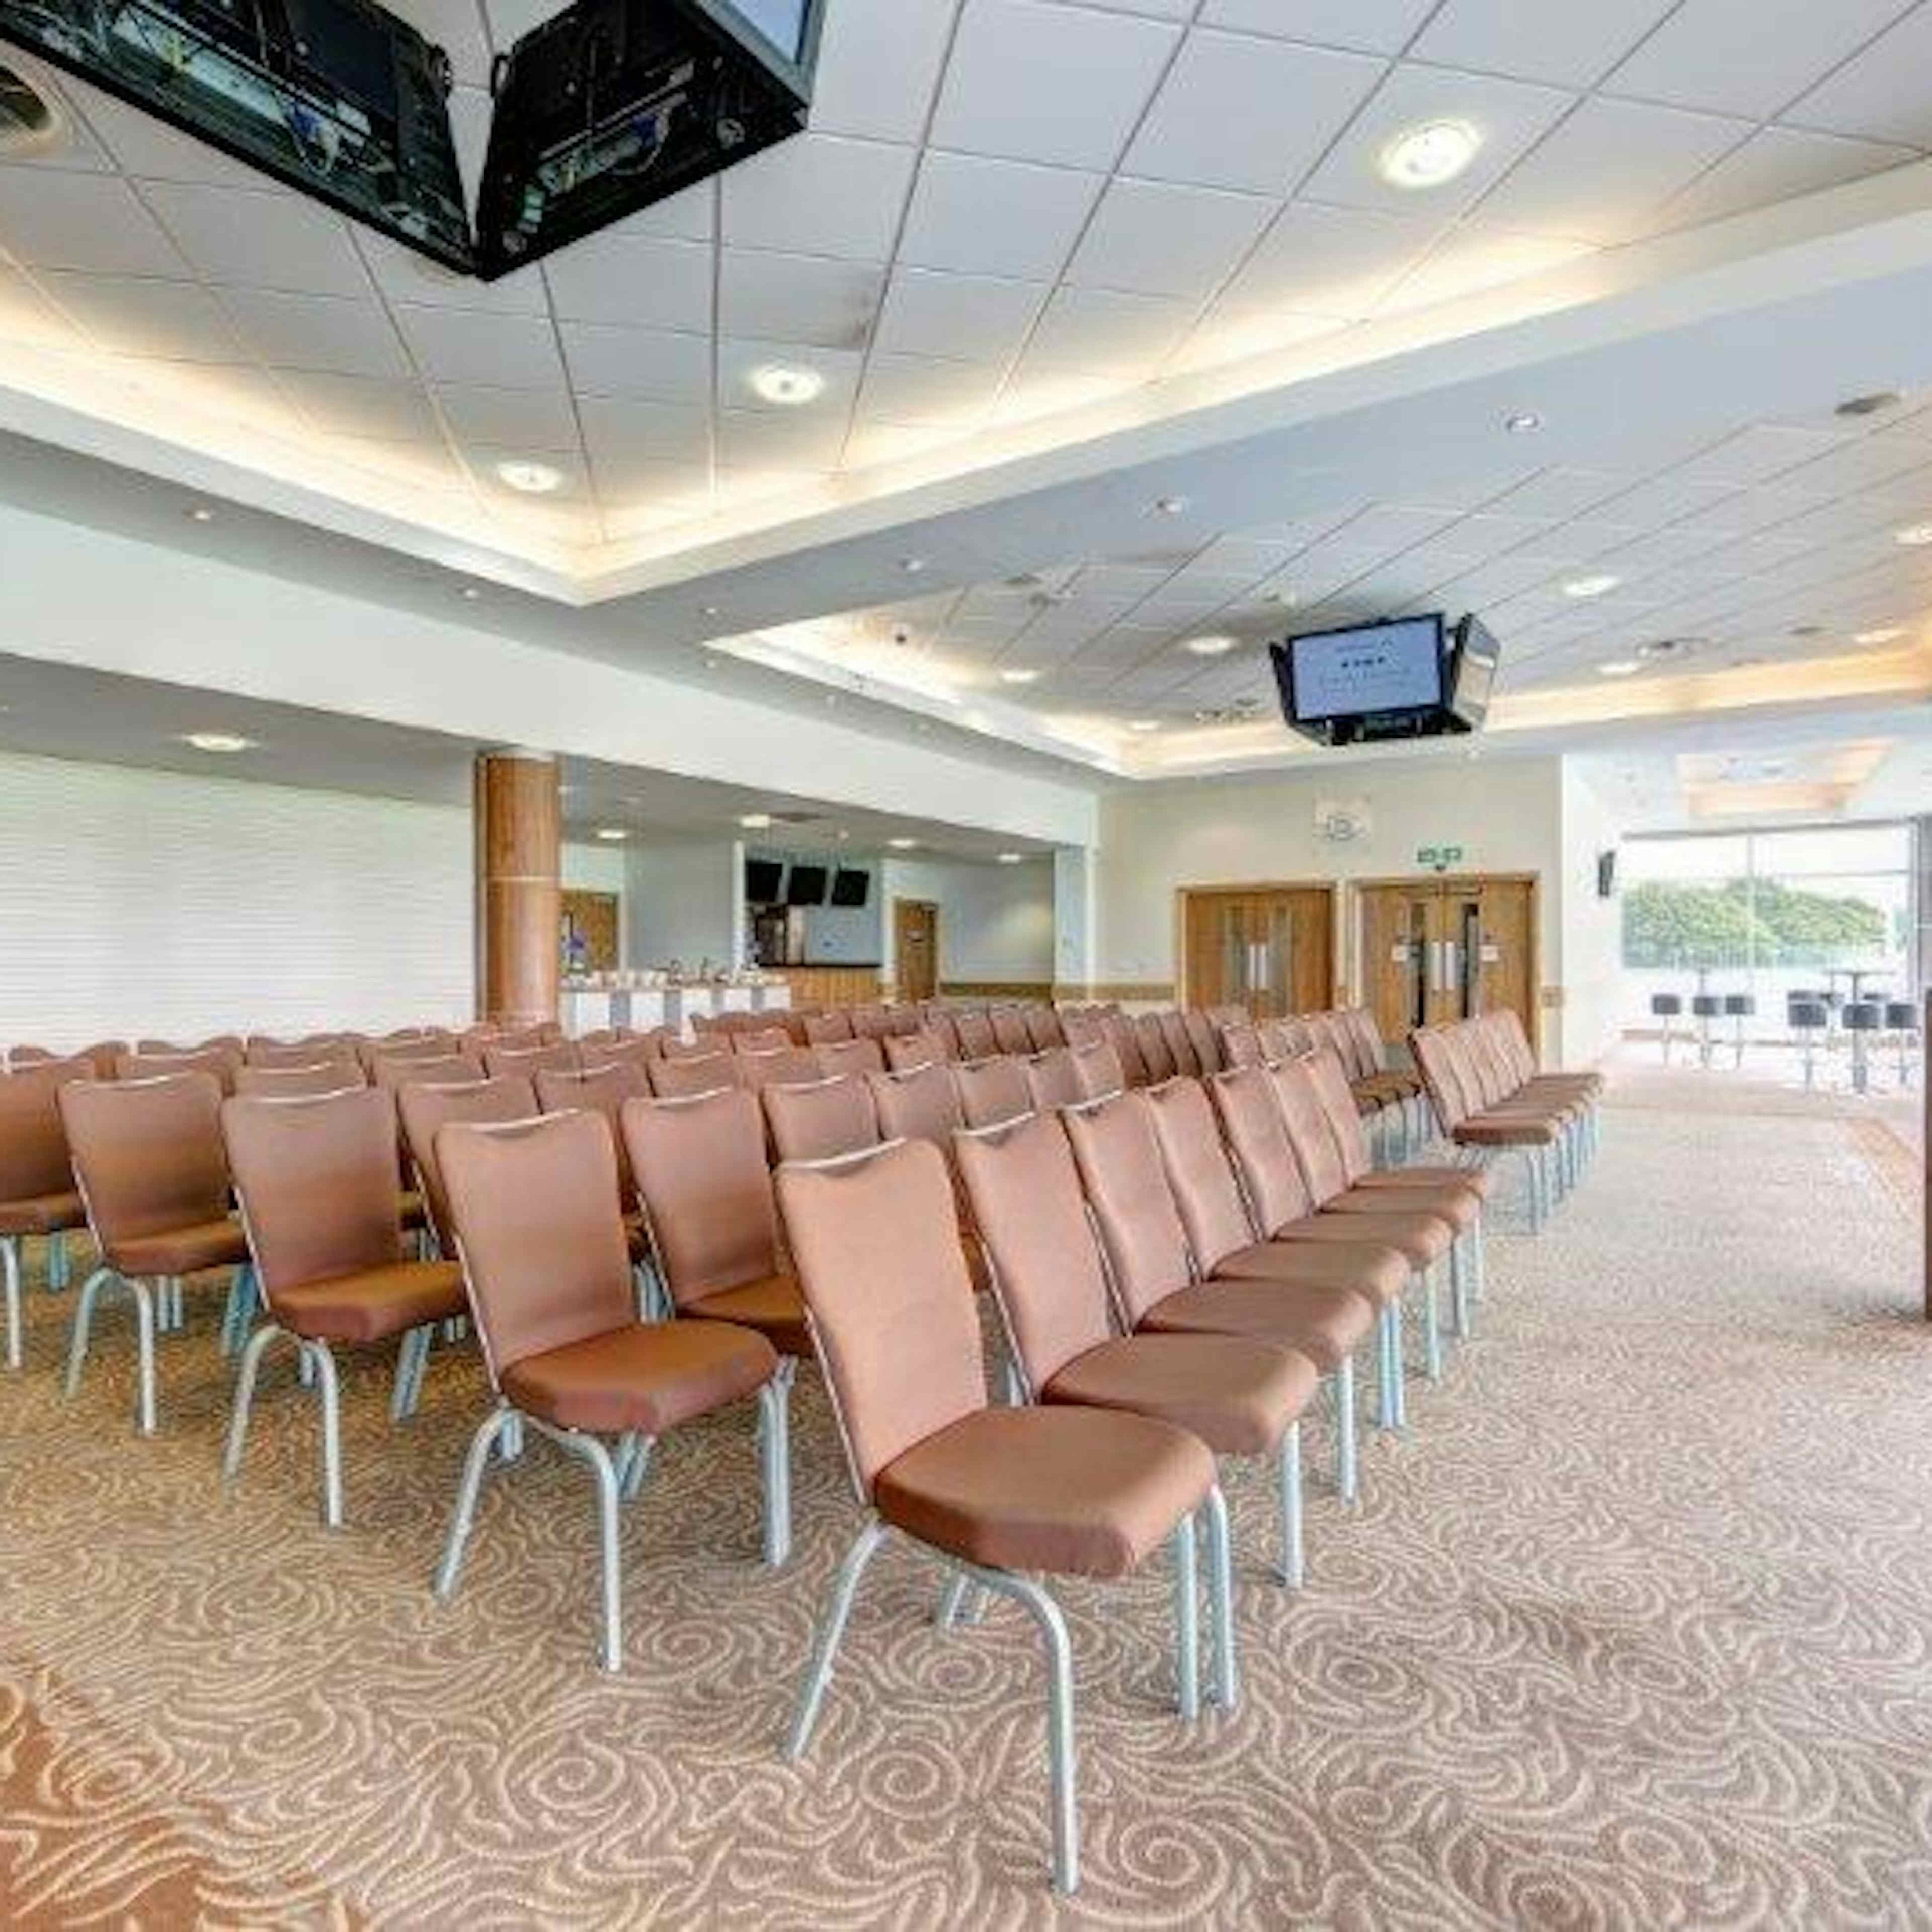 Epsom Downs Racecourse - The Gallops Suite image 1